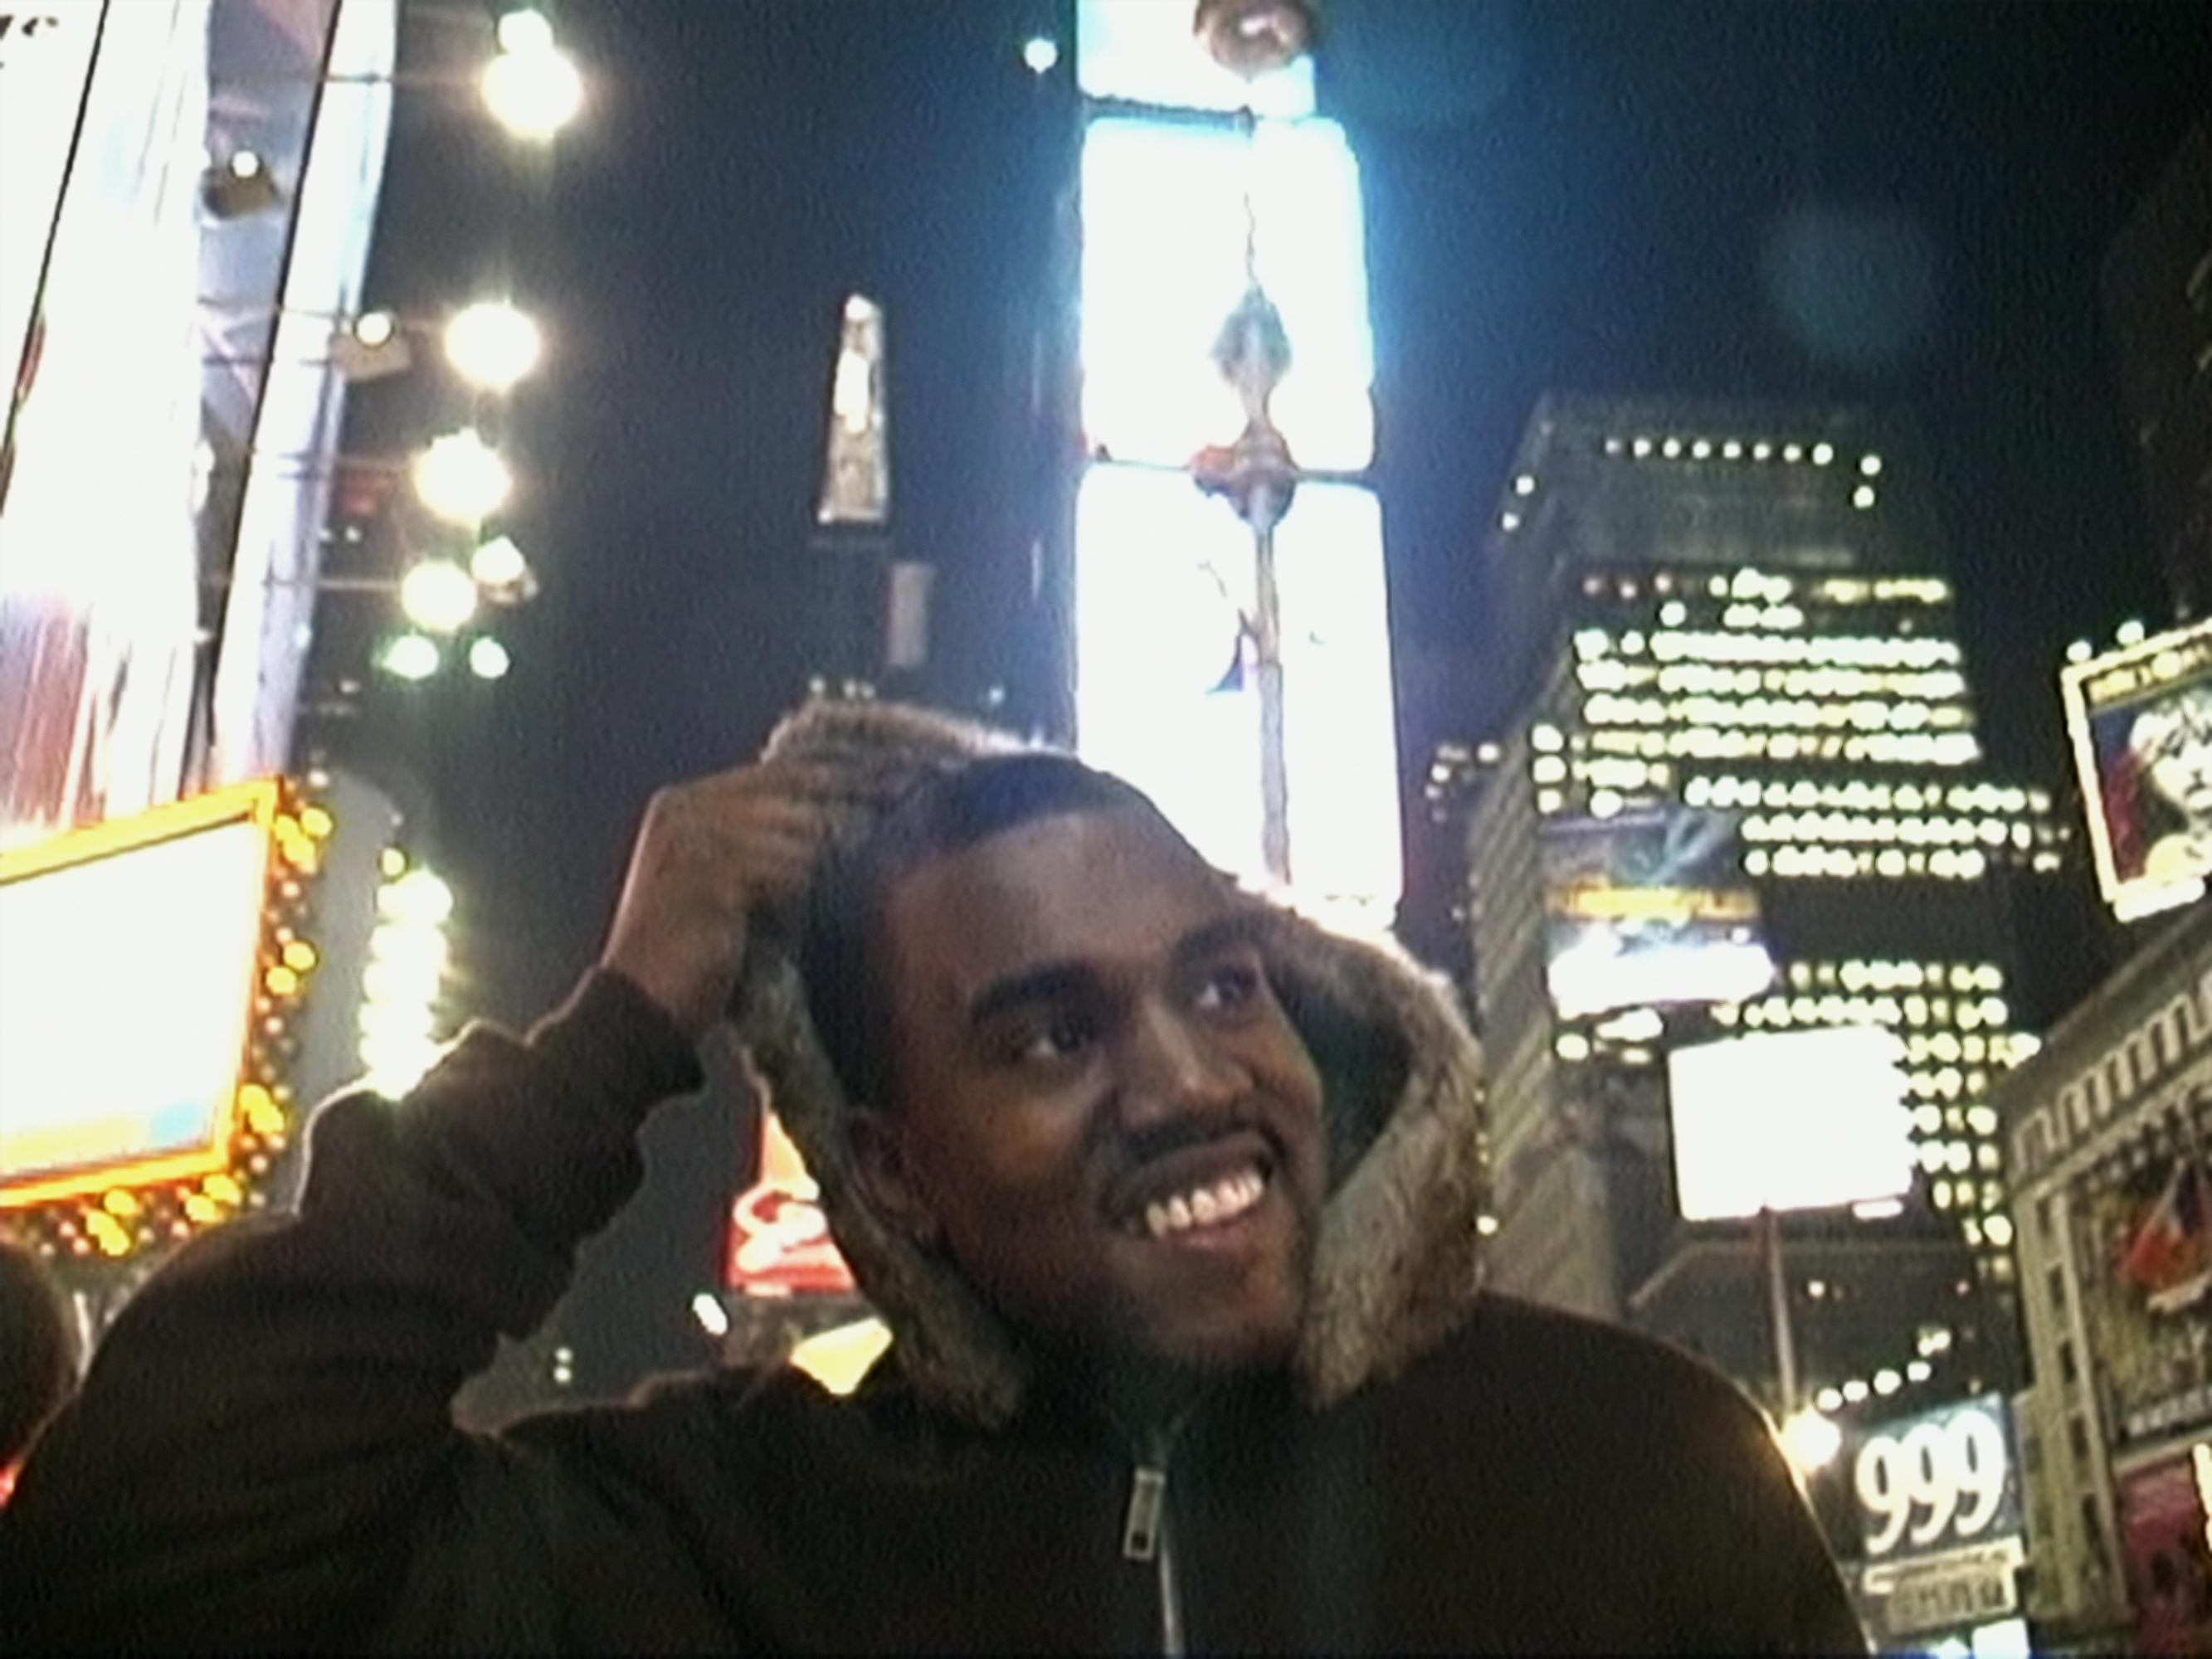 Kanye West wears a brown jacket with a furry hood. Behind him are illuminated buildings.